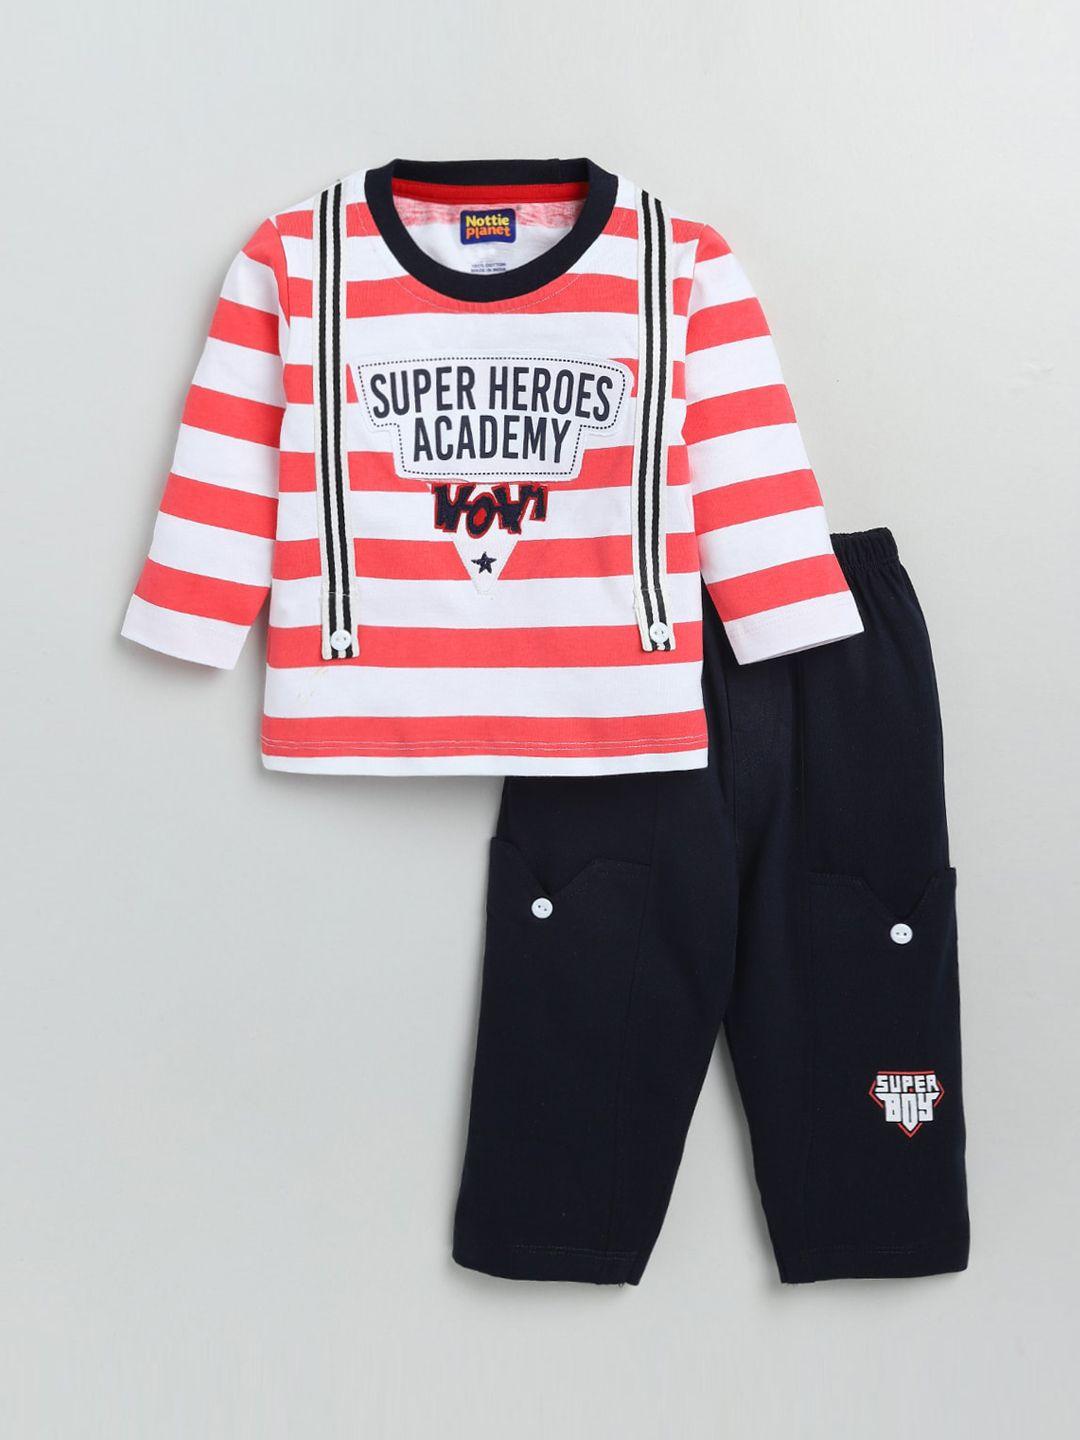 nottie planet boys red & black striped pure cotton t-shirt with pyjamas